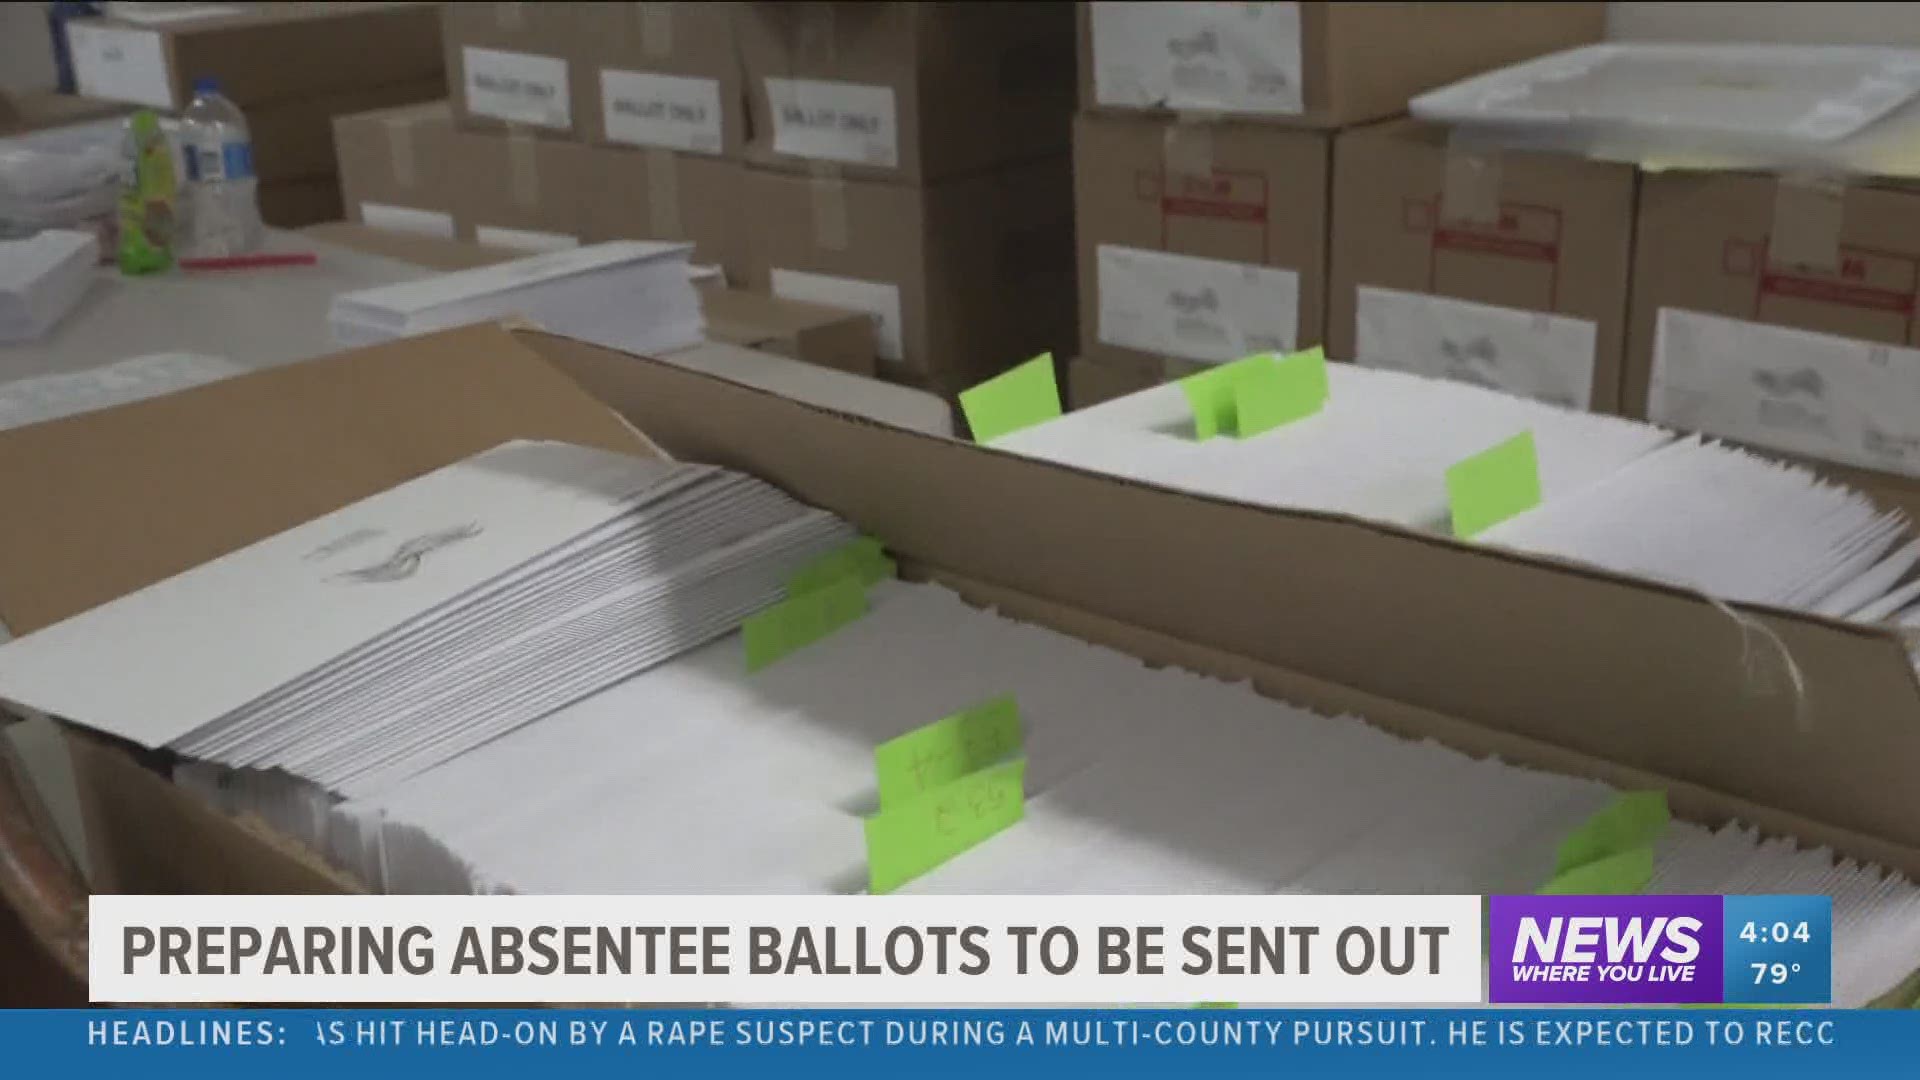 Absentee ballots going out today.